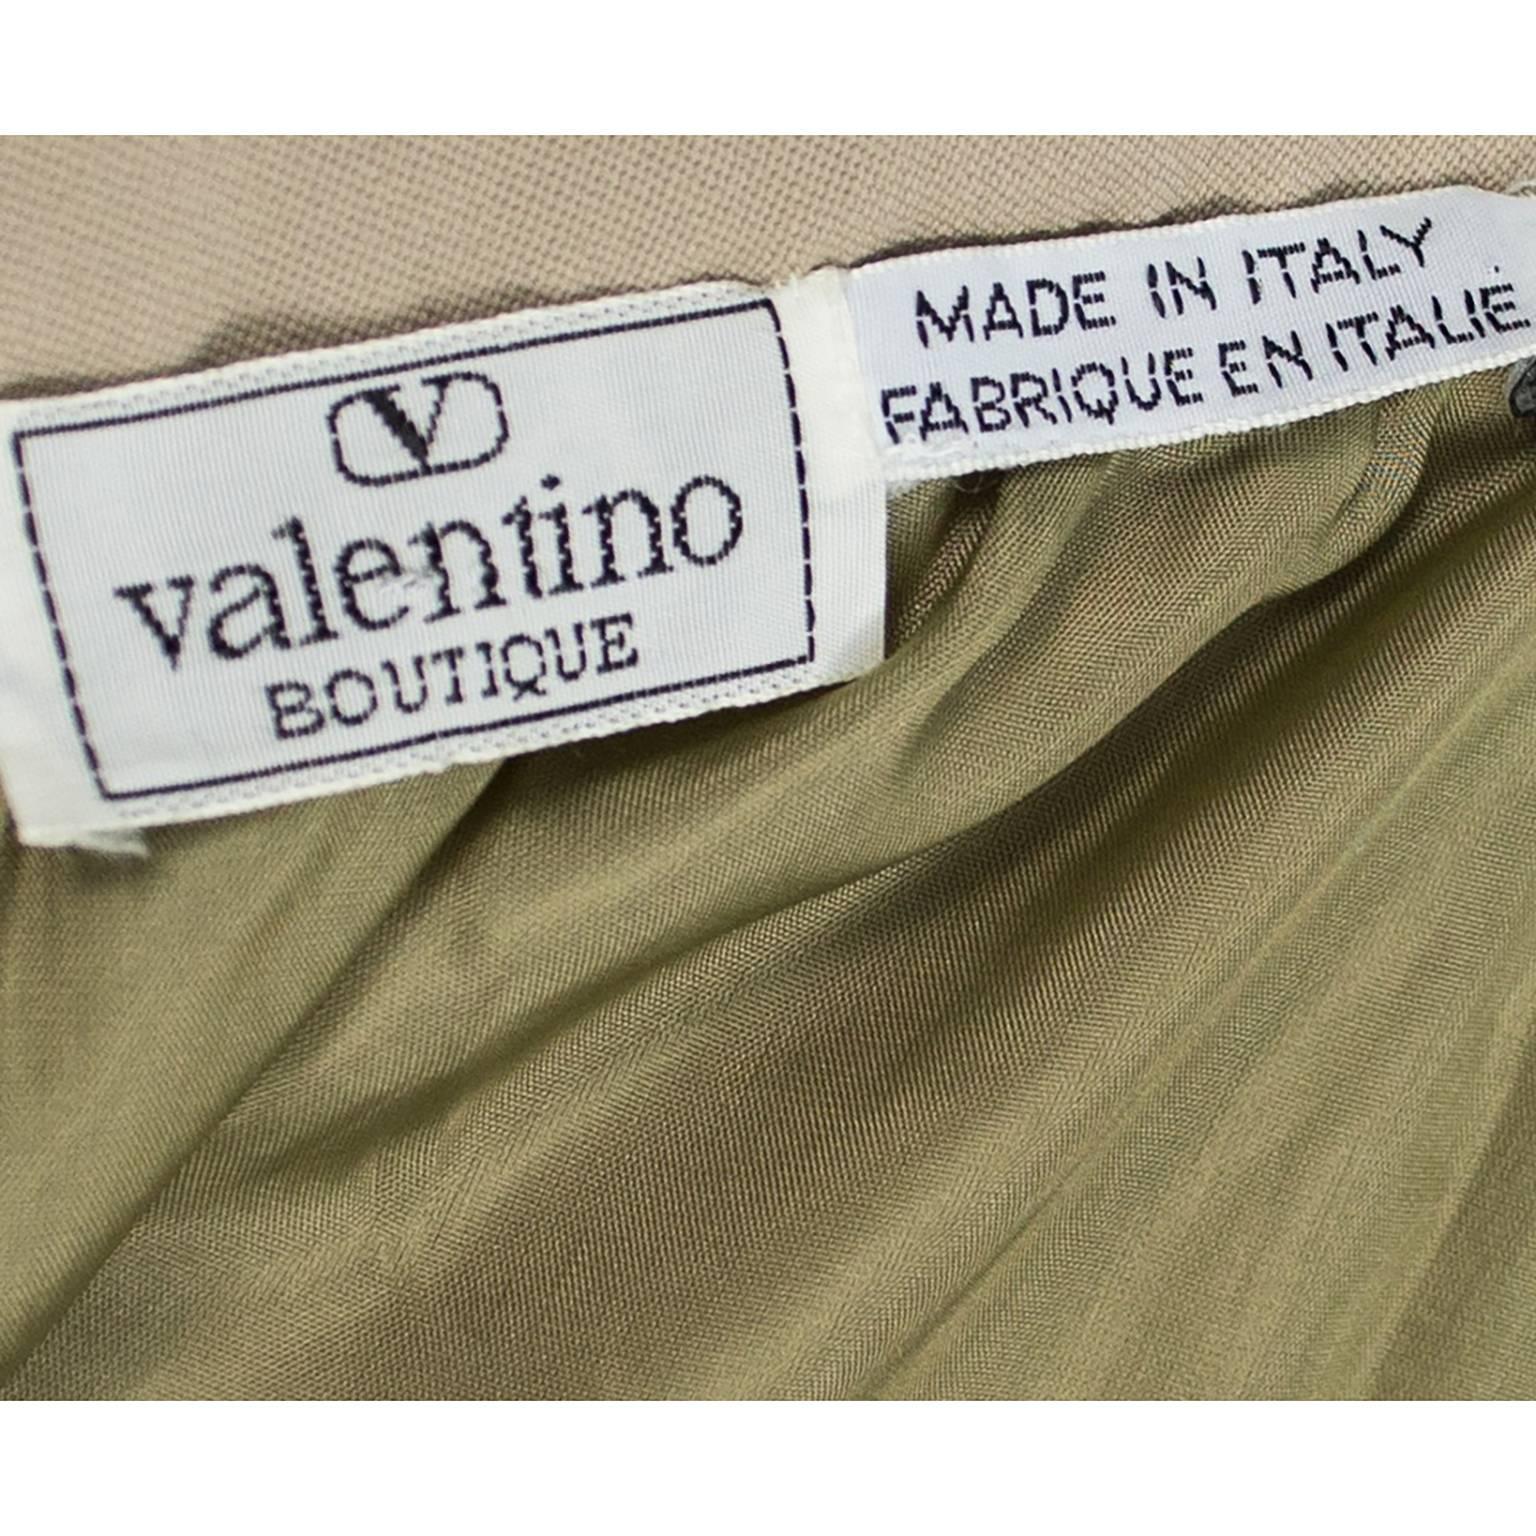 1984 Runway Vintage Valentino Boutique 2pc Skirt Top Outfit Pink & Camel Size 8 5